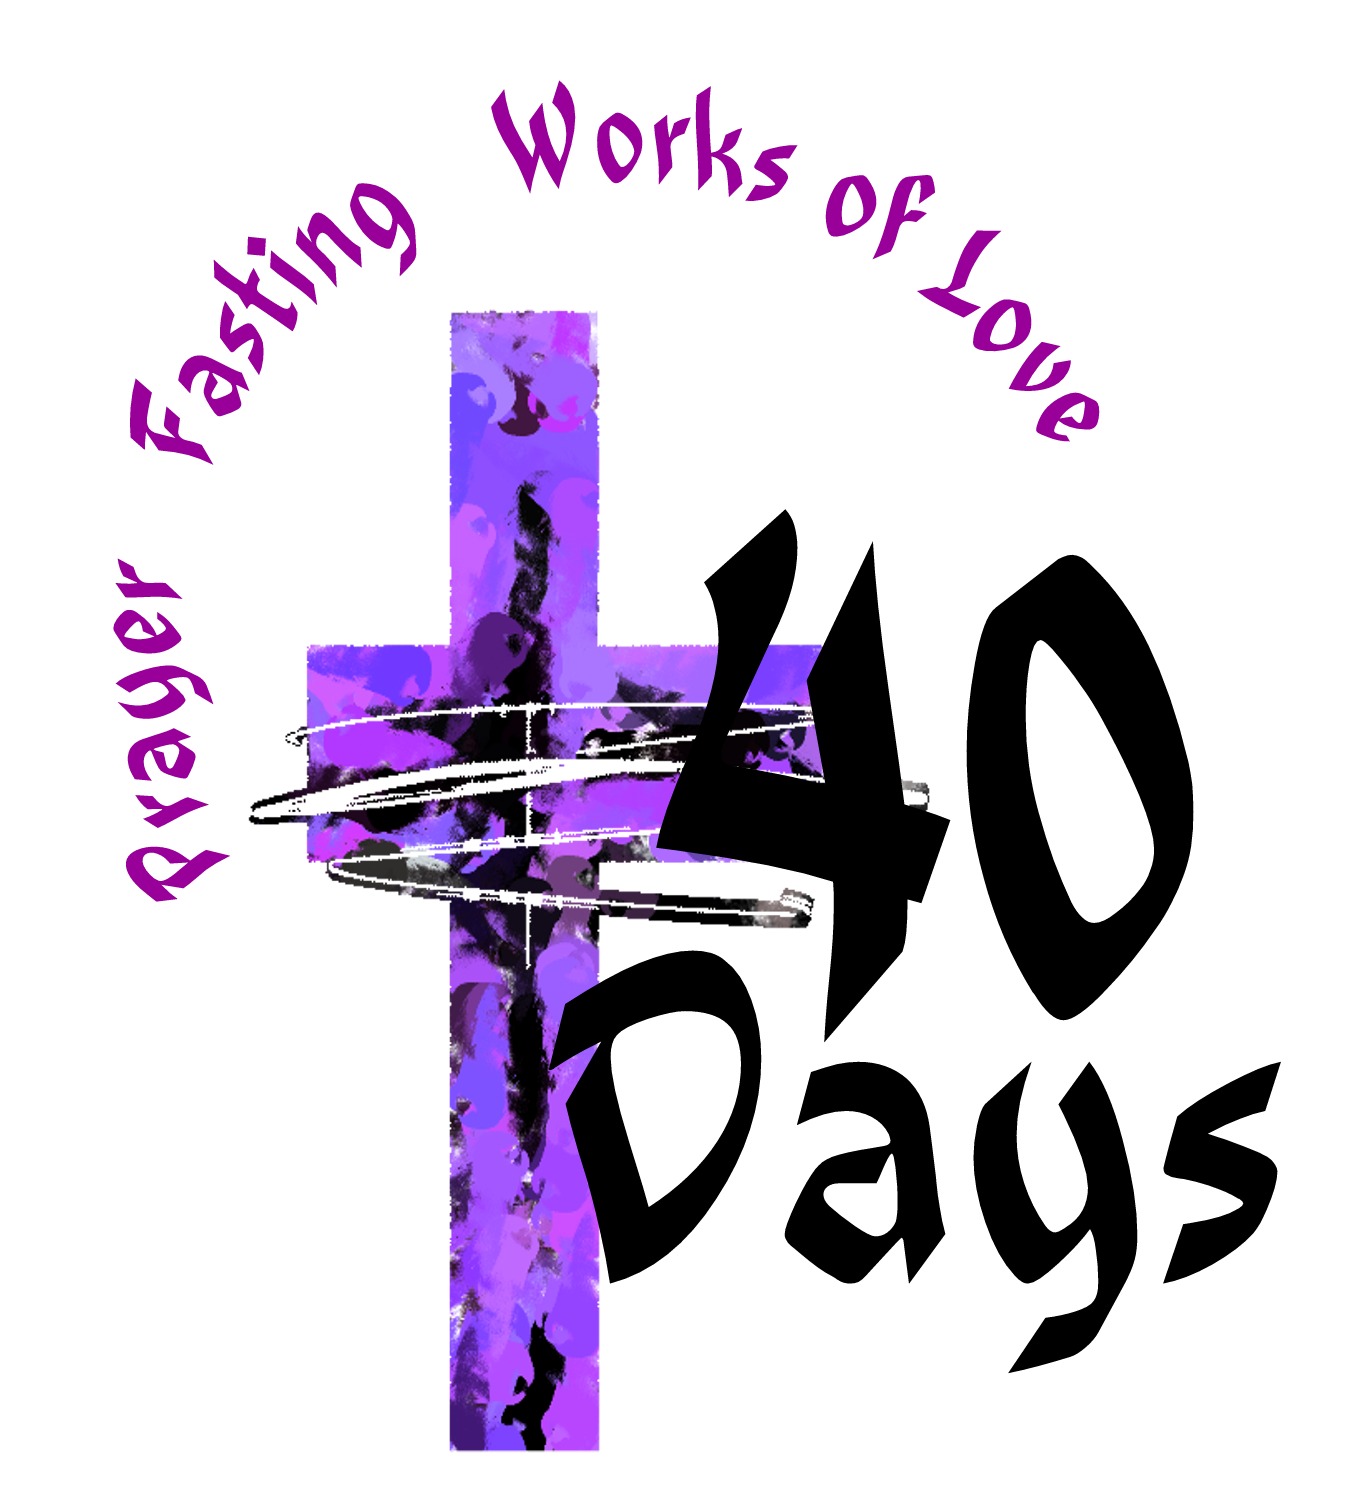 Free Lent Cliparts, Download Free Clip Art, Free Clip Art on